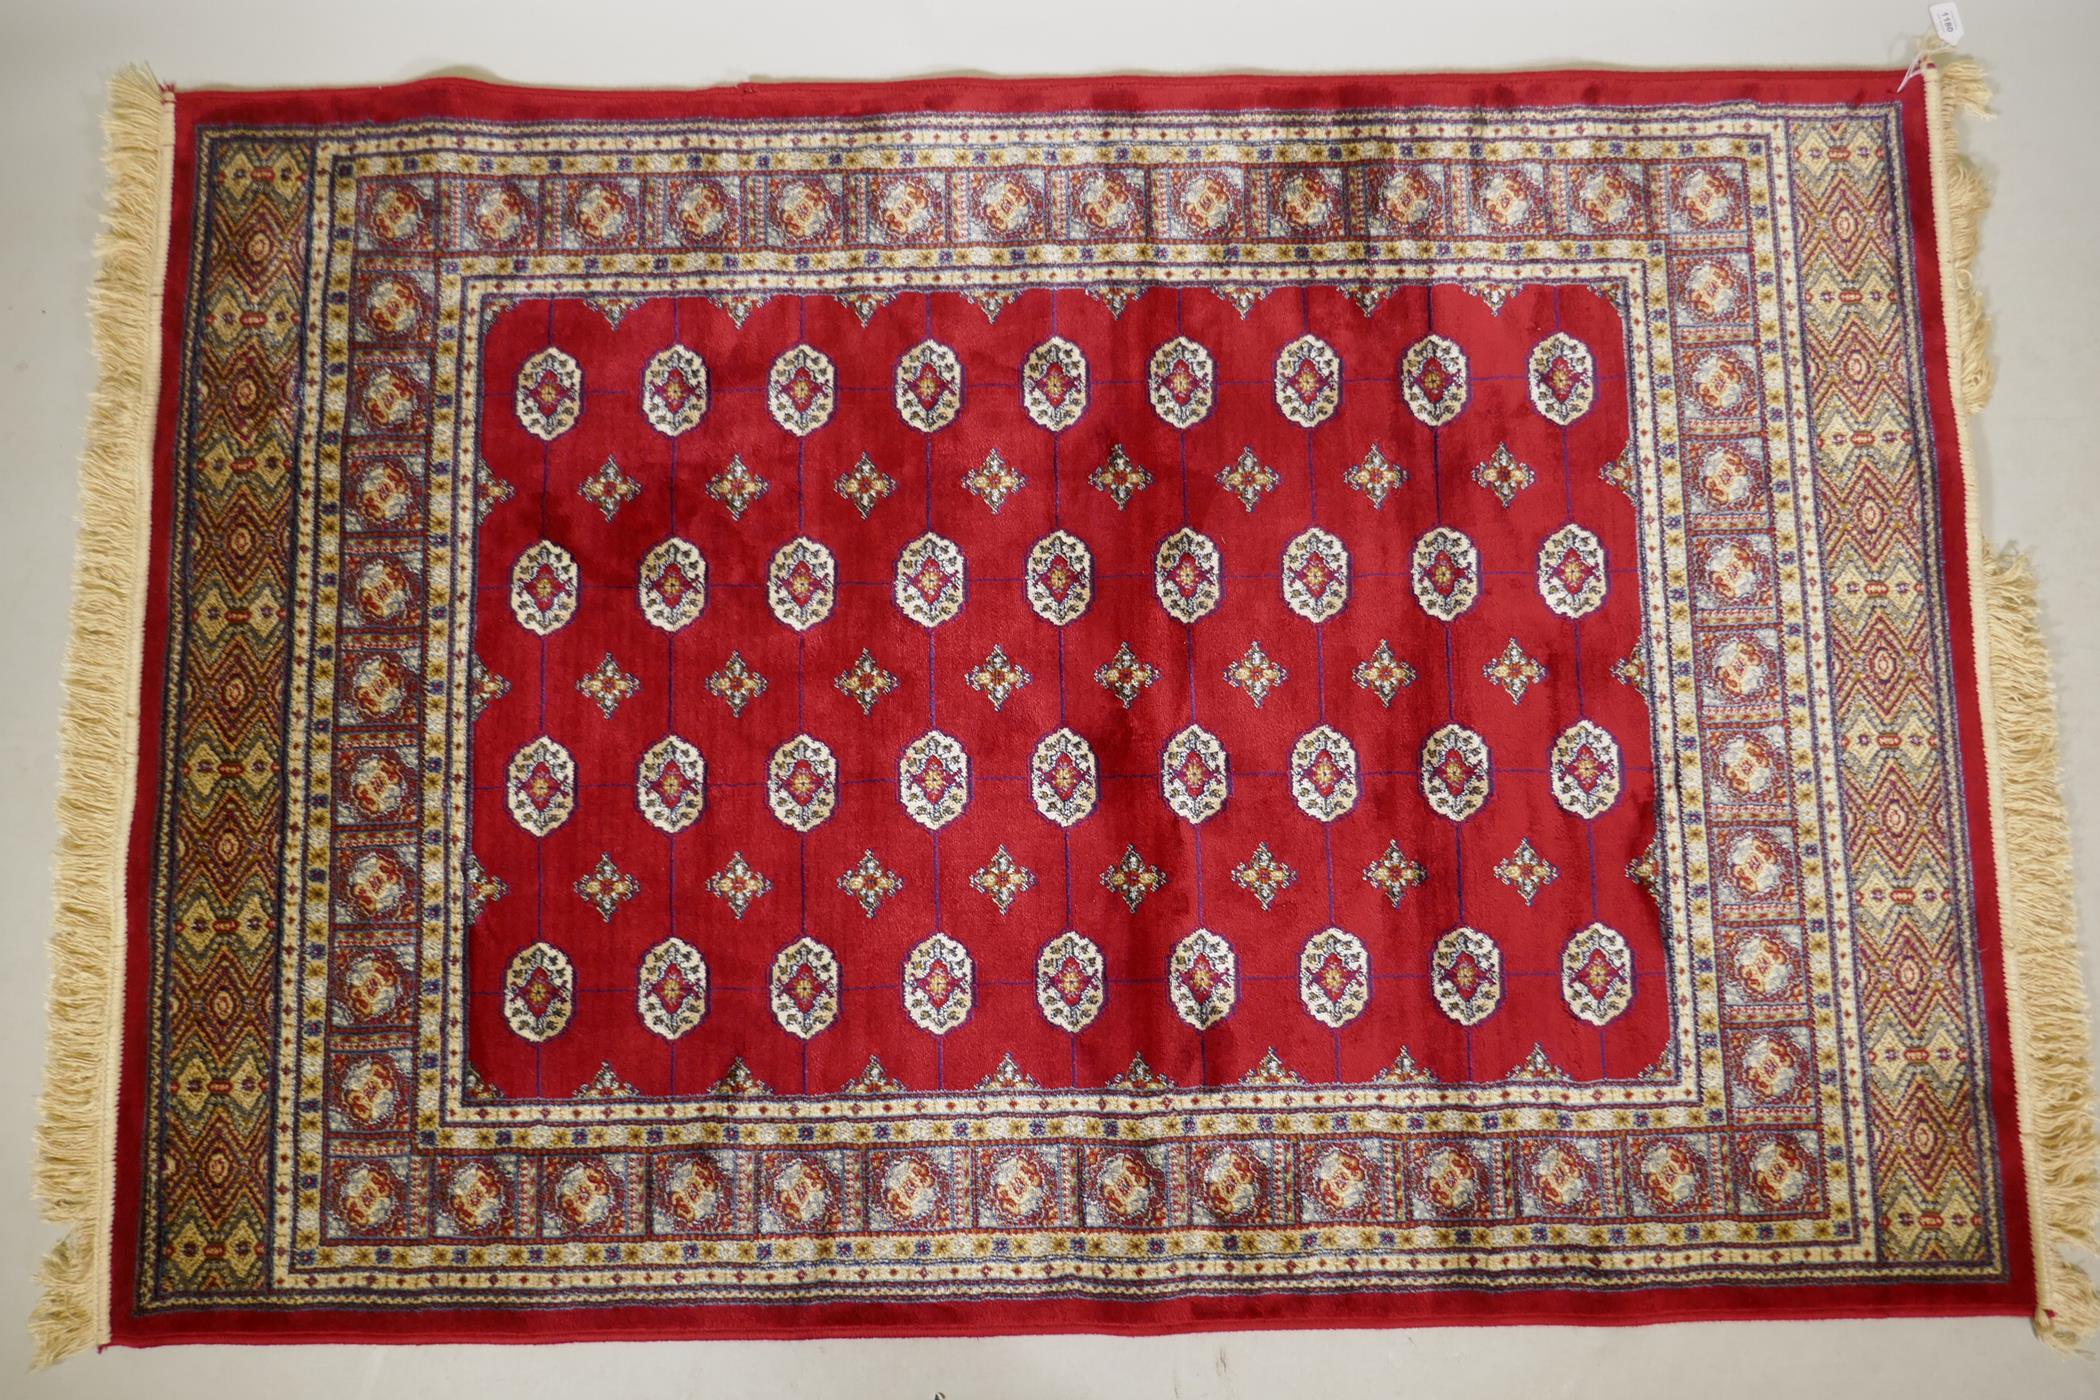 A rich red ground Kashmir rug with a Bokhara design, 47" x 69" - Image 2 of 6